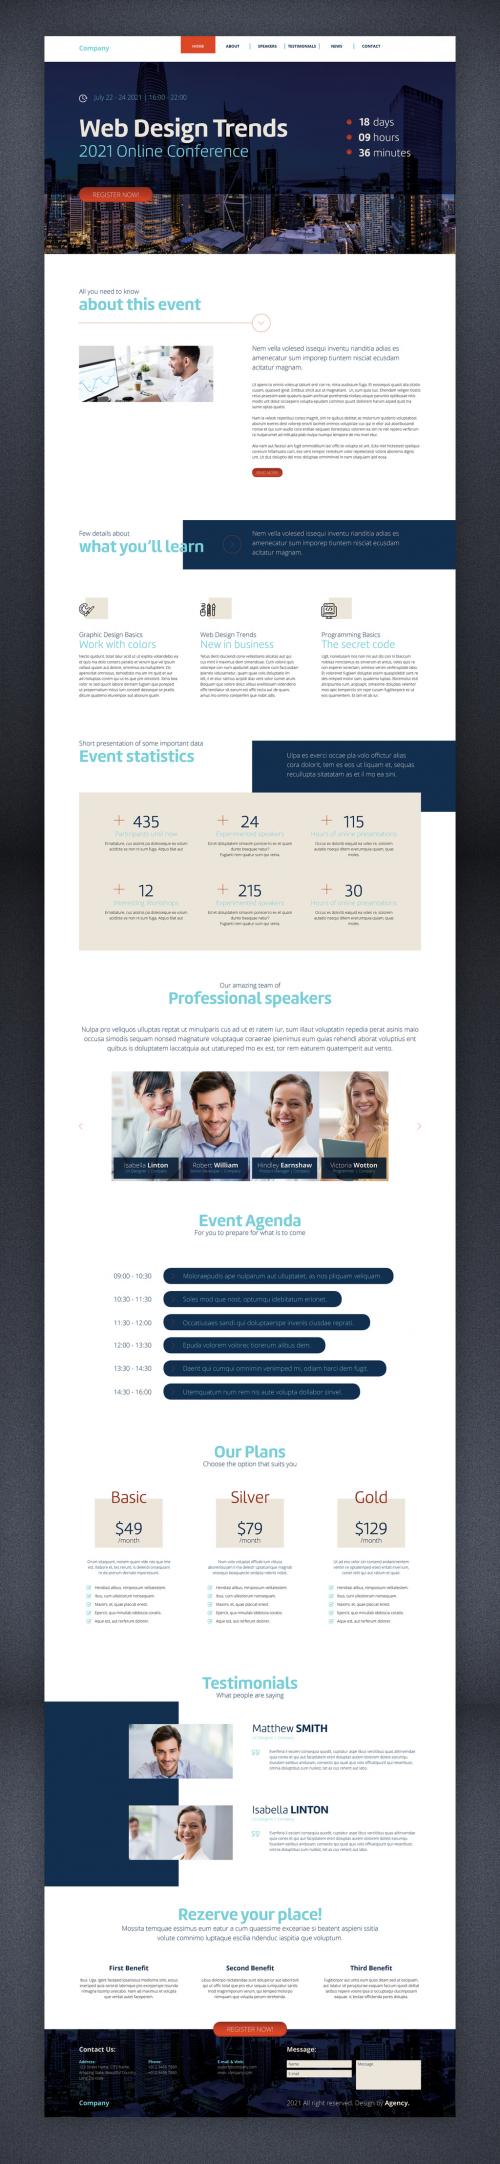 Online Event Landing Page with Blue and Red Accents - 433490672